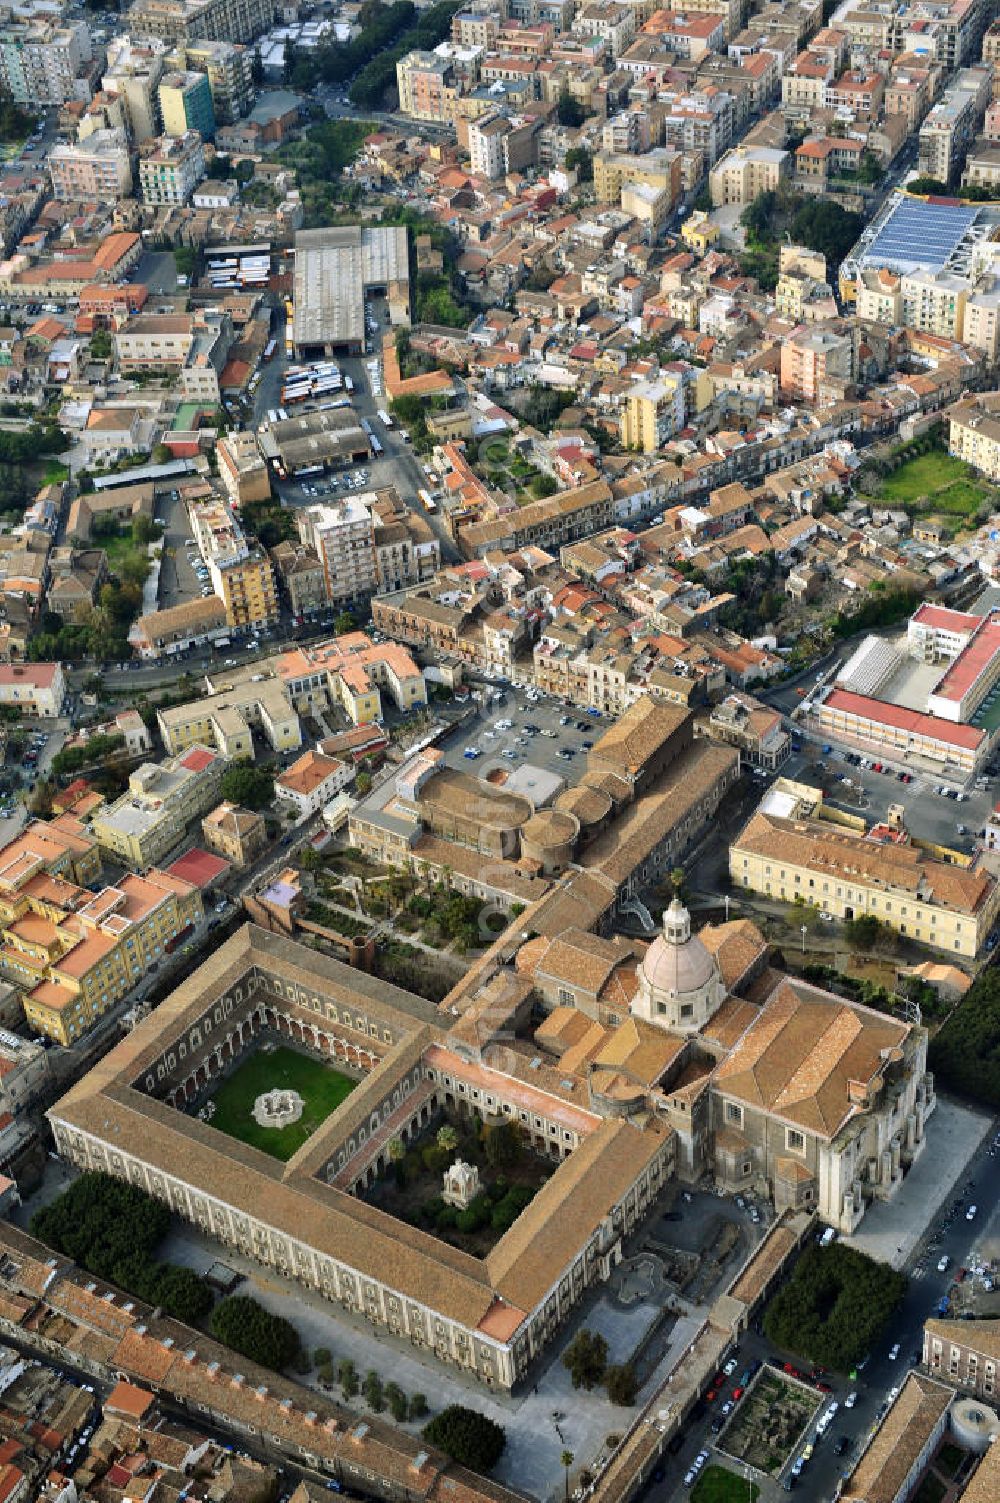 Catania Sizilien from the bird's eye view: The monastery was originally a Benedictine monastery of San Nicola and now houses part of the University of Catania, with the adjoining unfinished church of San Nicola l'Arena Cantania on Sicily in Italy